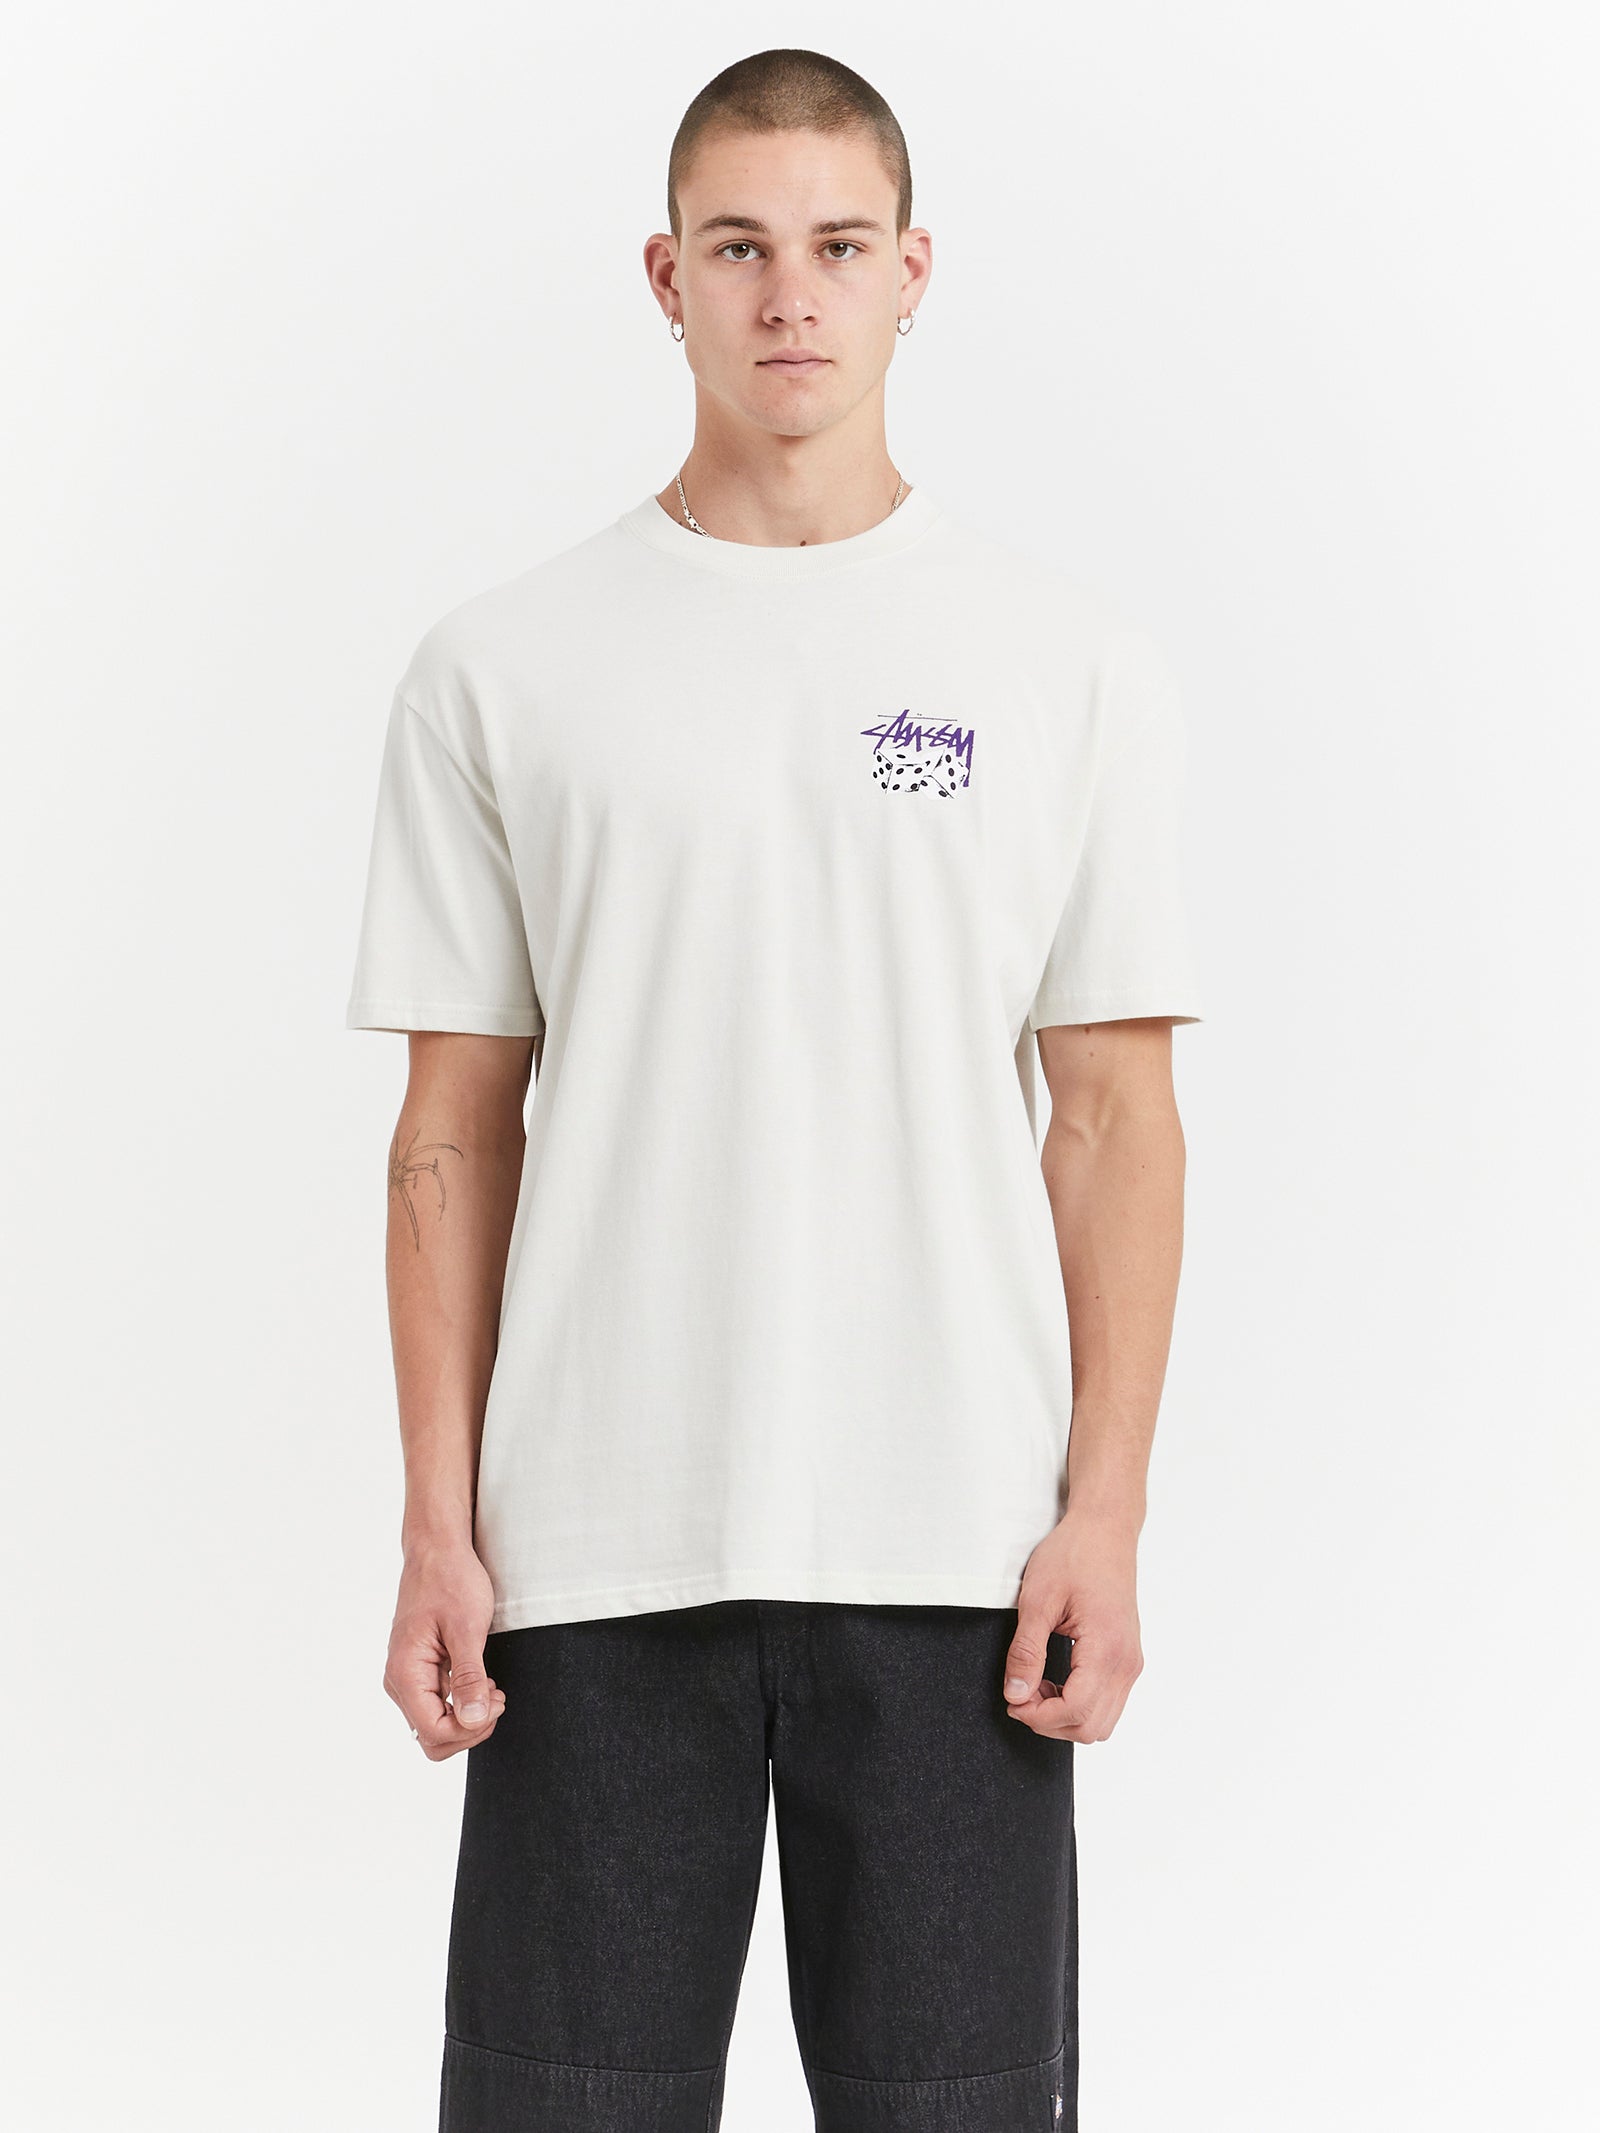 Pair Of Dice Solid Heavyweight T-Shirt in White & Purple - Glue Store